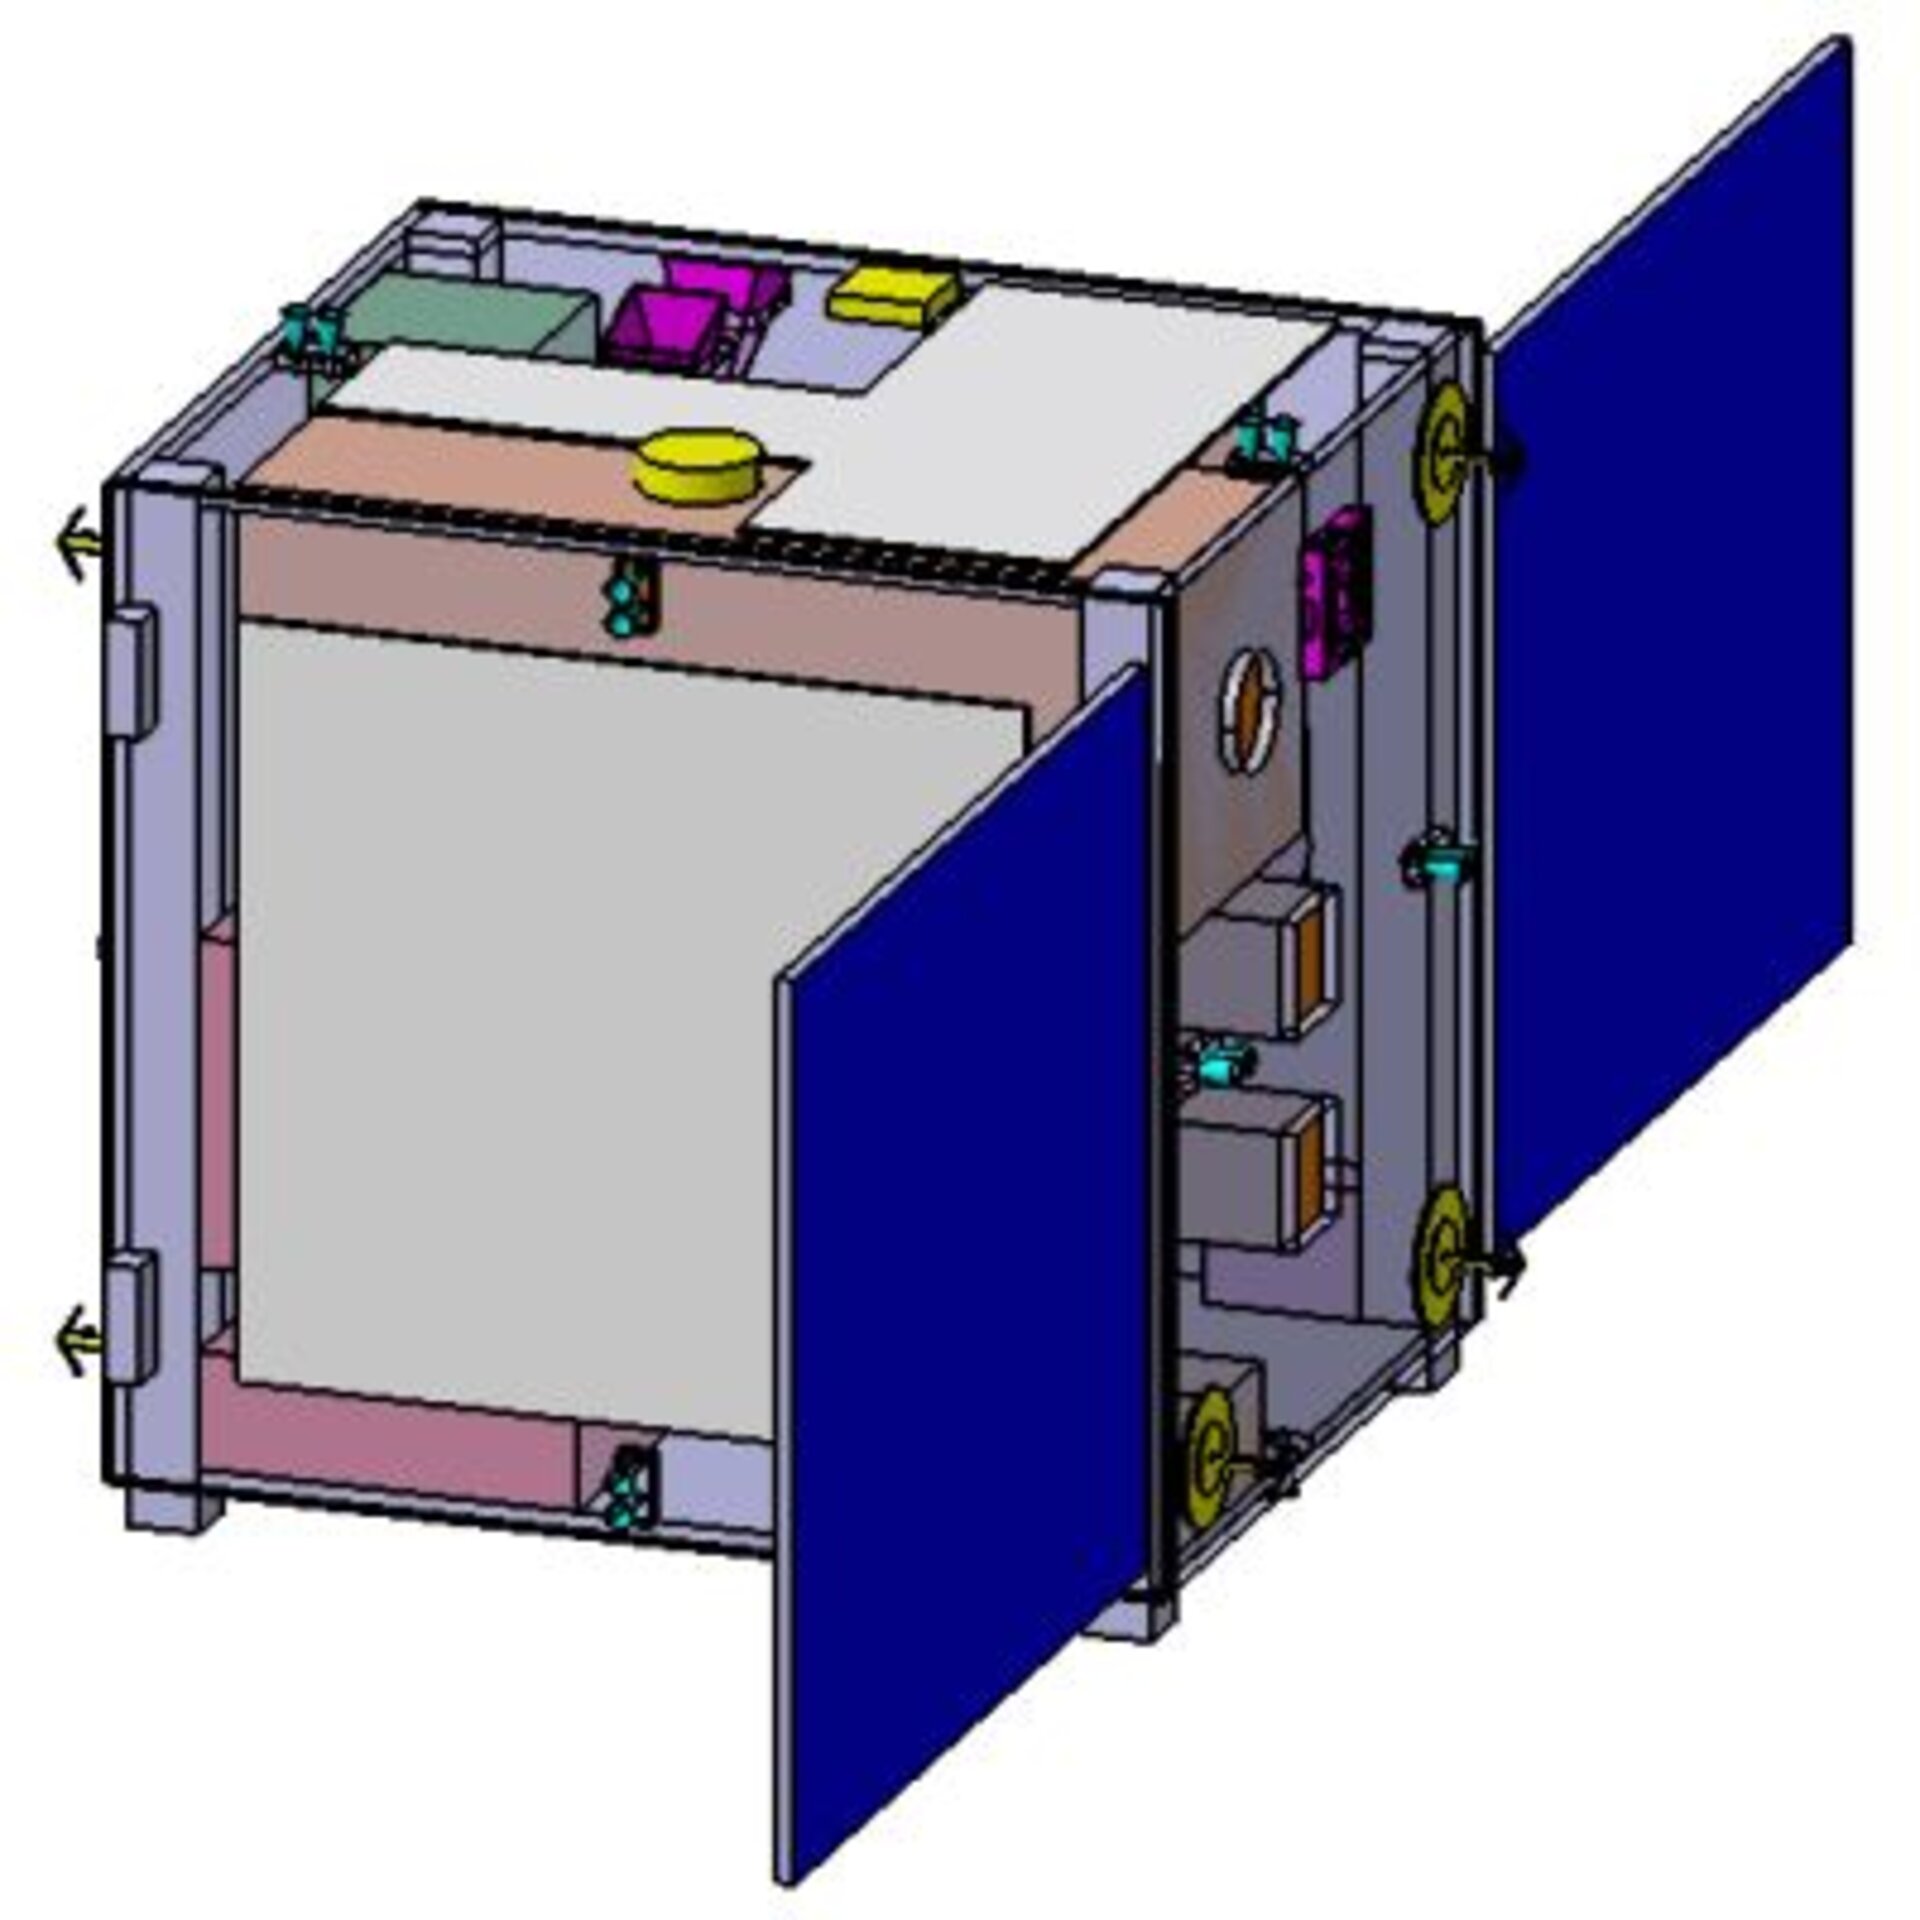 Preliminary design for the larger of the two Proba-3 spacecraft